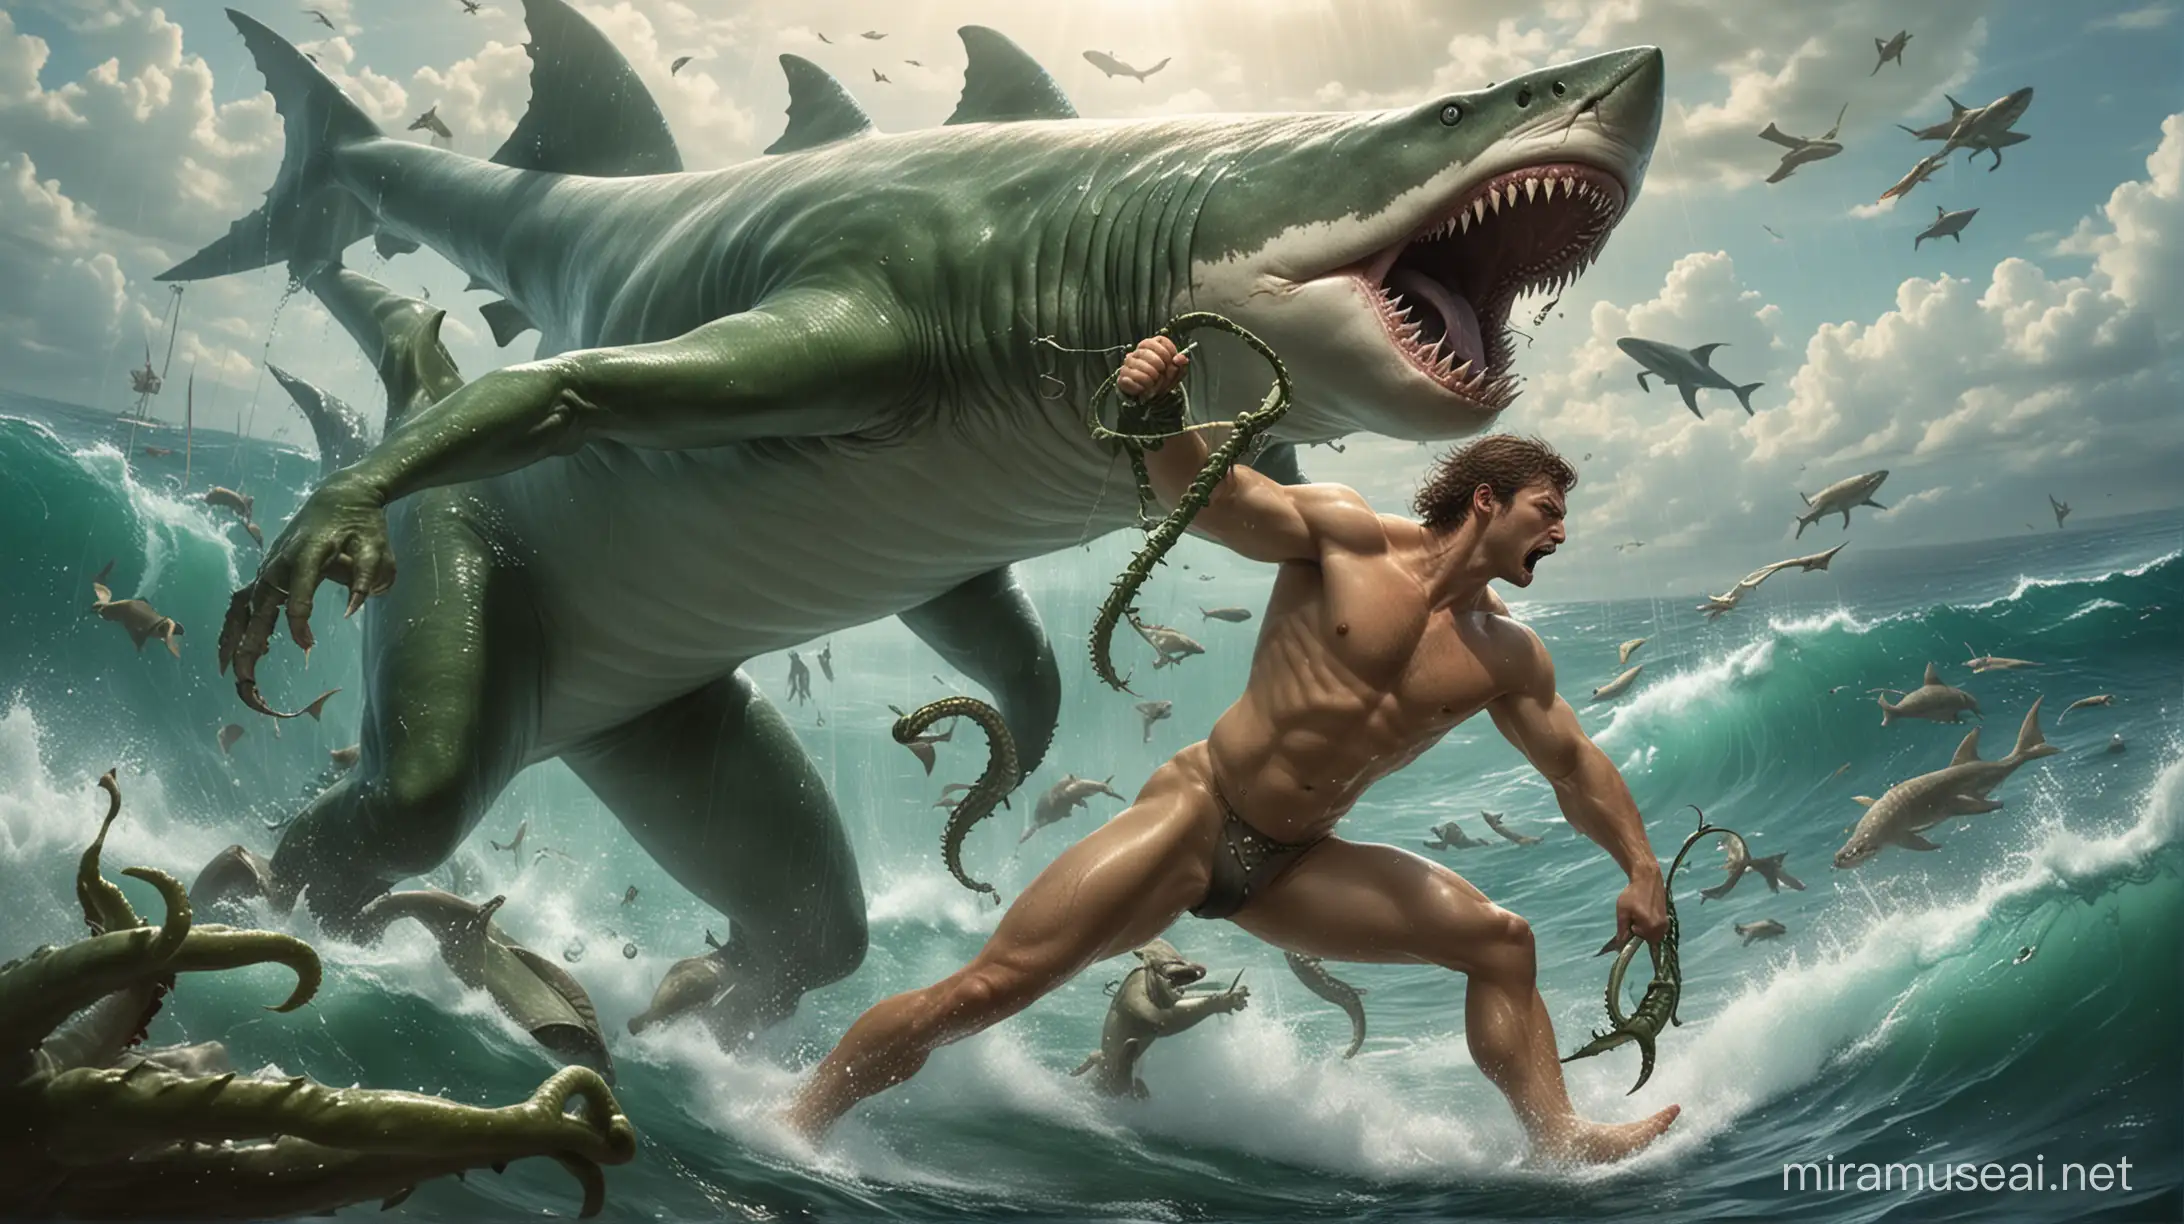 Epic Battle Nude Male Warrior vs Shark Man with Green Tentacles